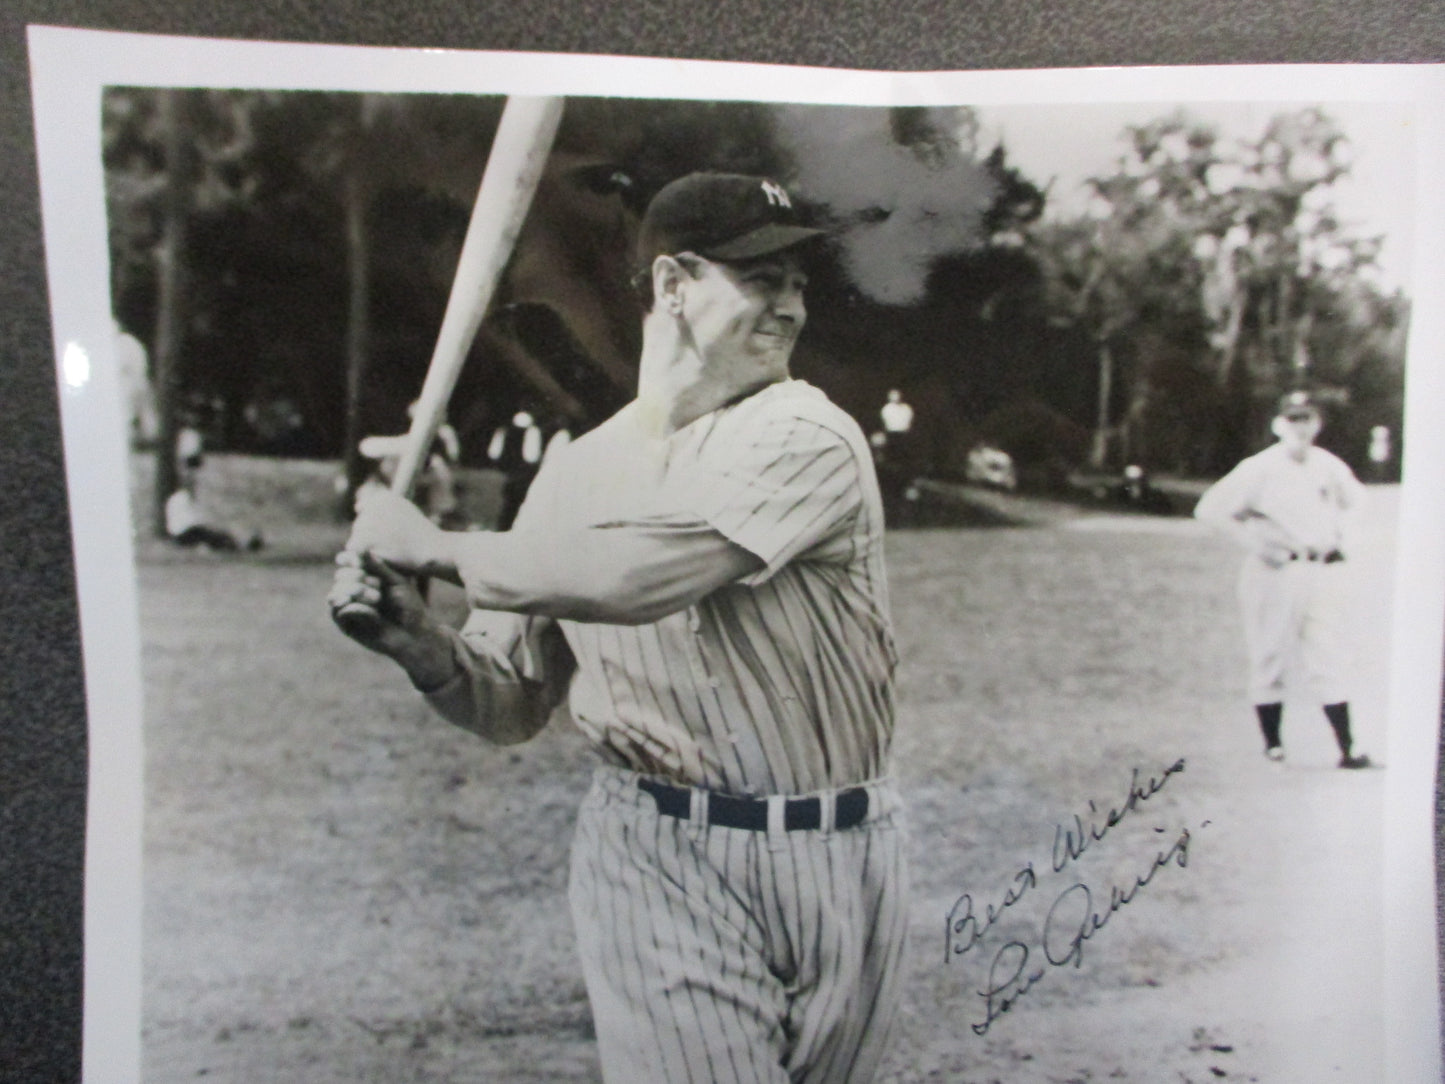 Lou Gehrig Yankees Signed Photo "Best Wishes" 9 1/2" x 8" Circa 1930's